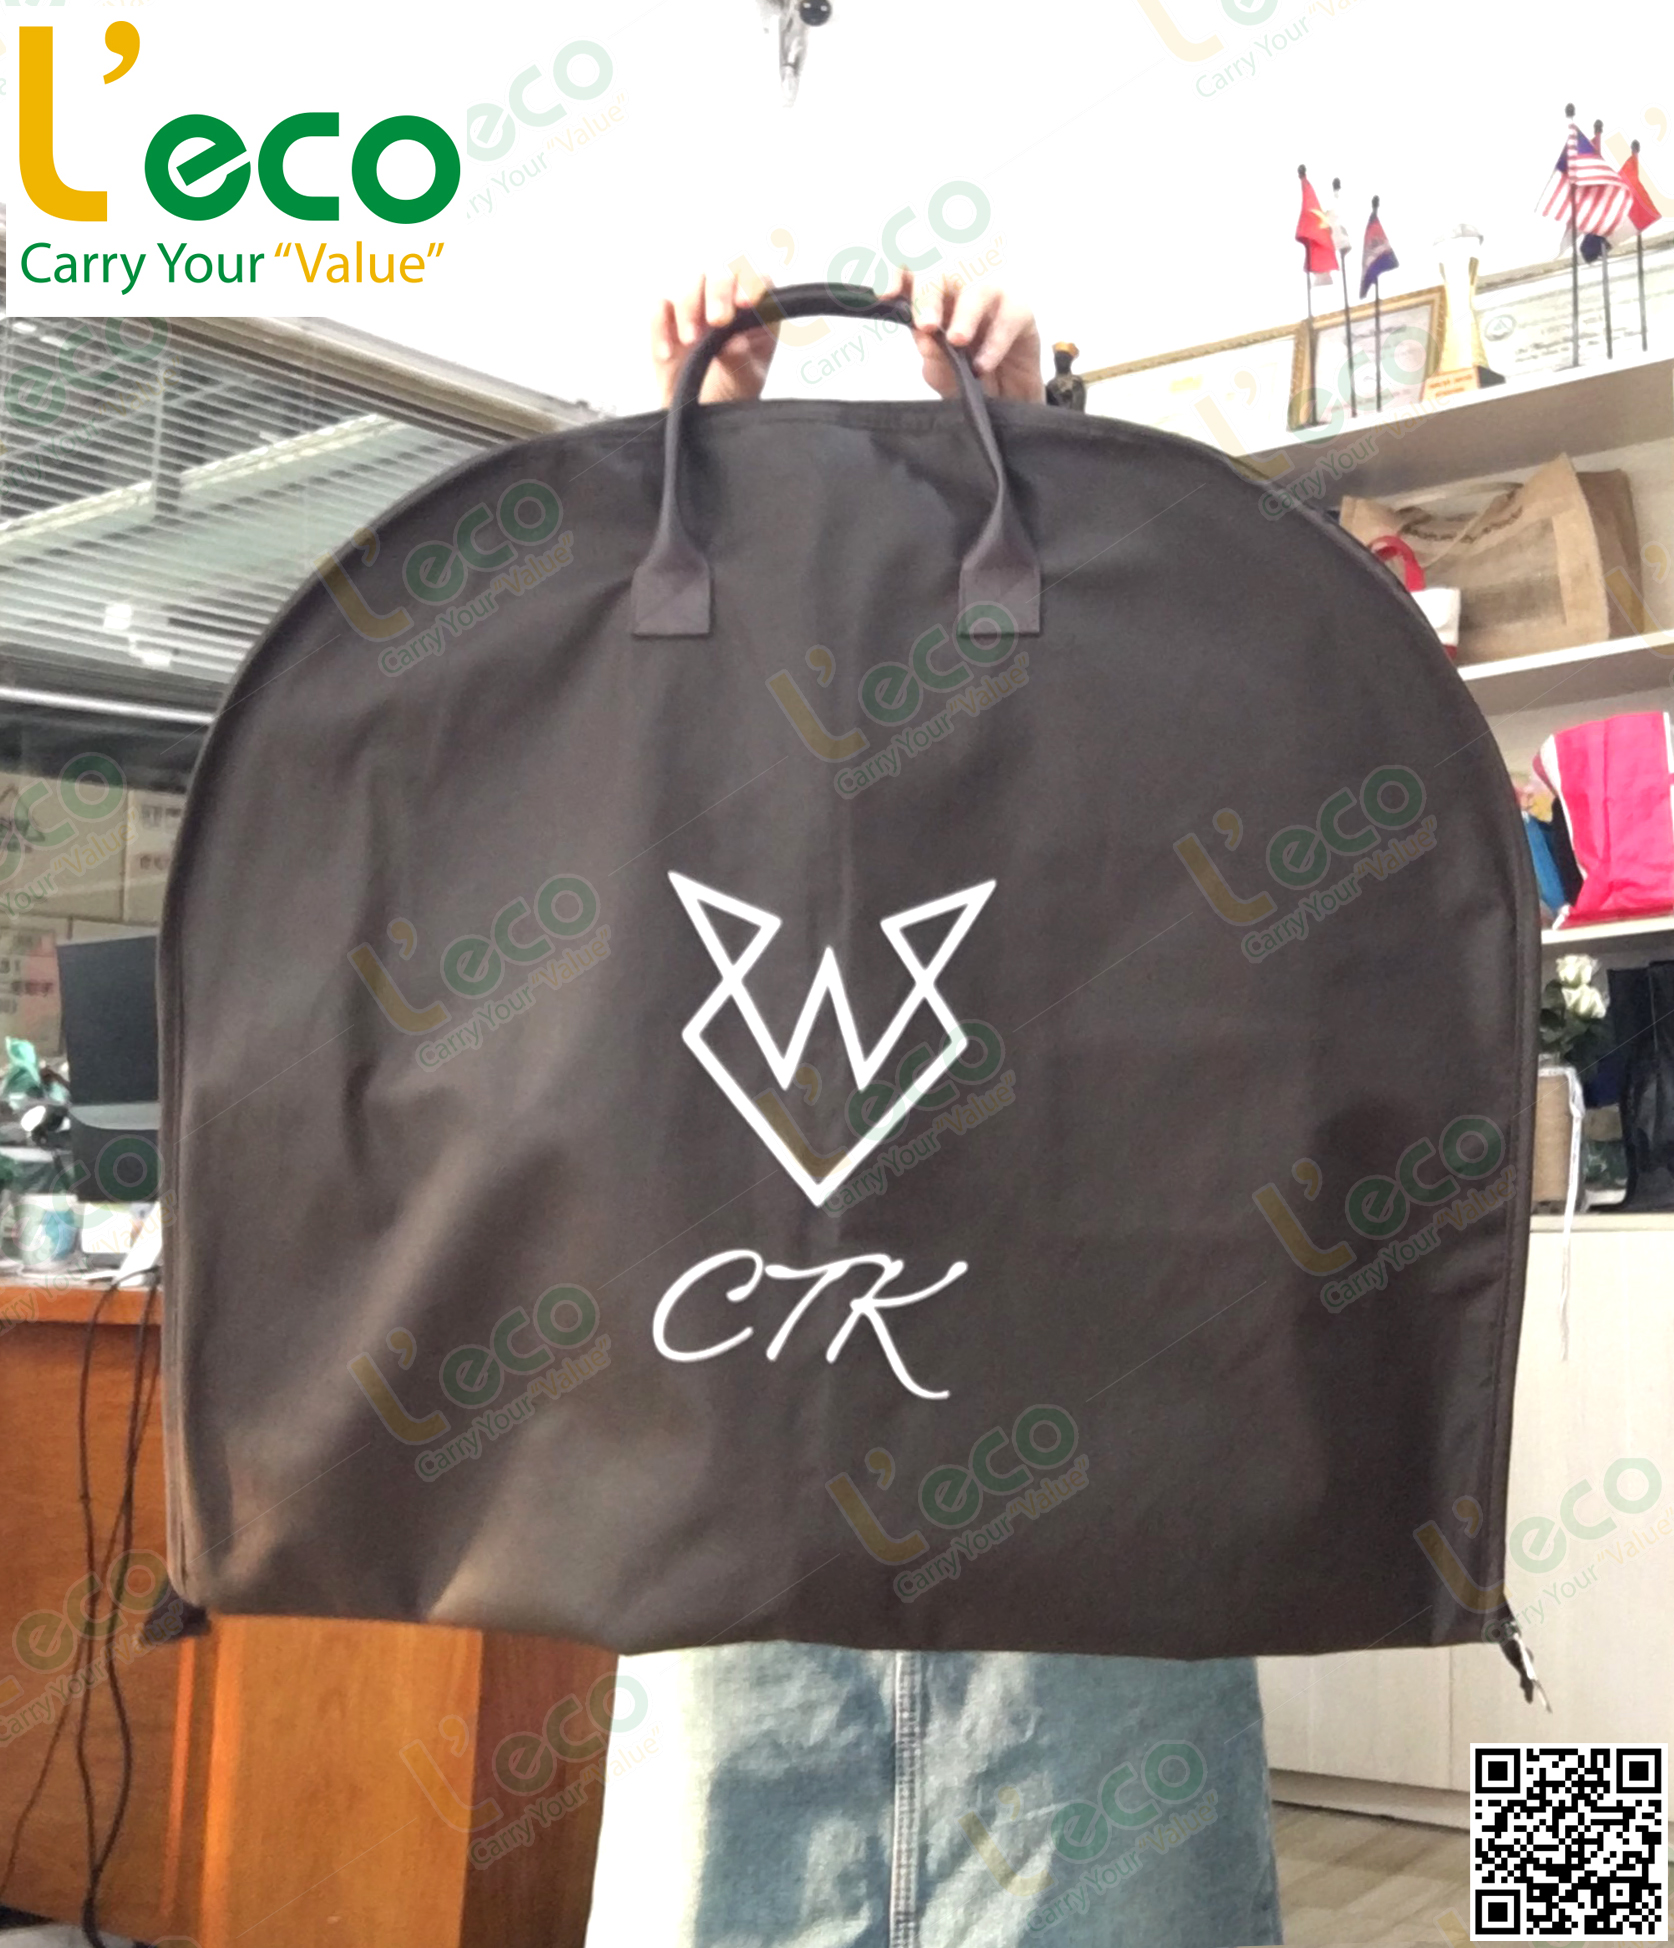 suit bag with logo printed